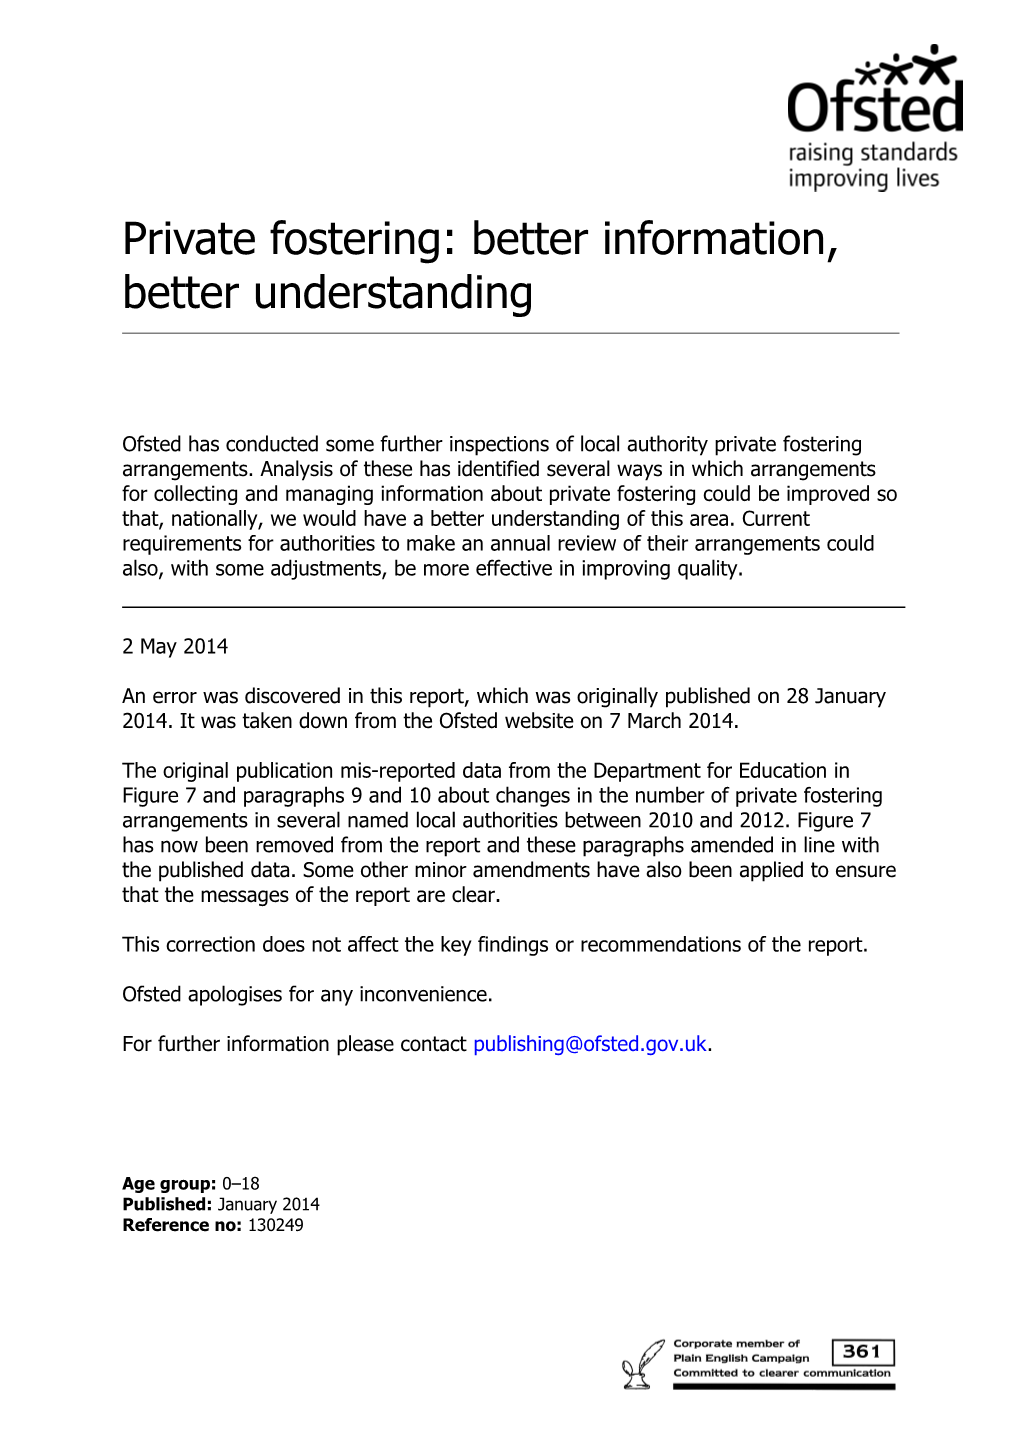 Part A: What Do We Know About Private Fostering?